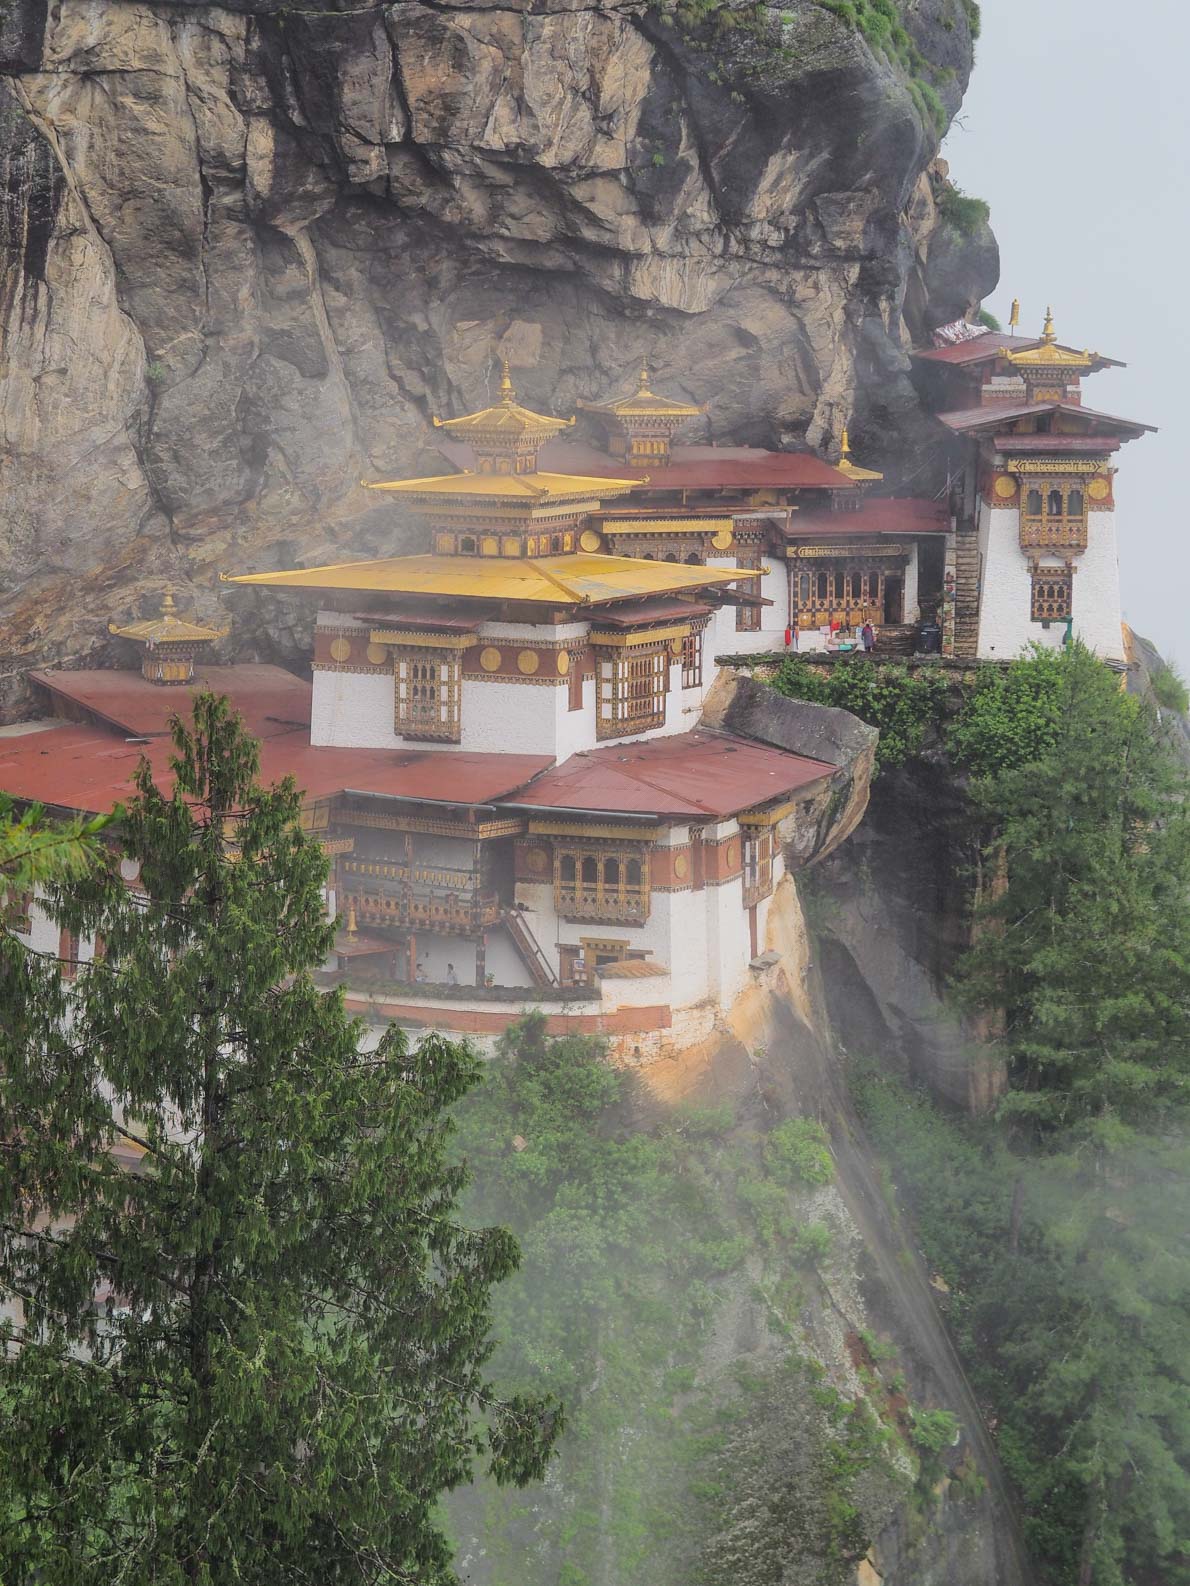 Travel guide to the Tiger Nest Monastery in Bhutan